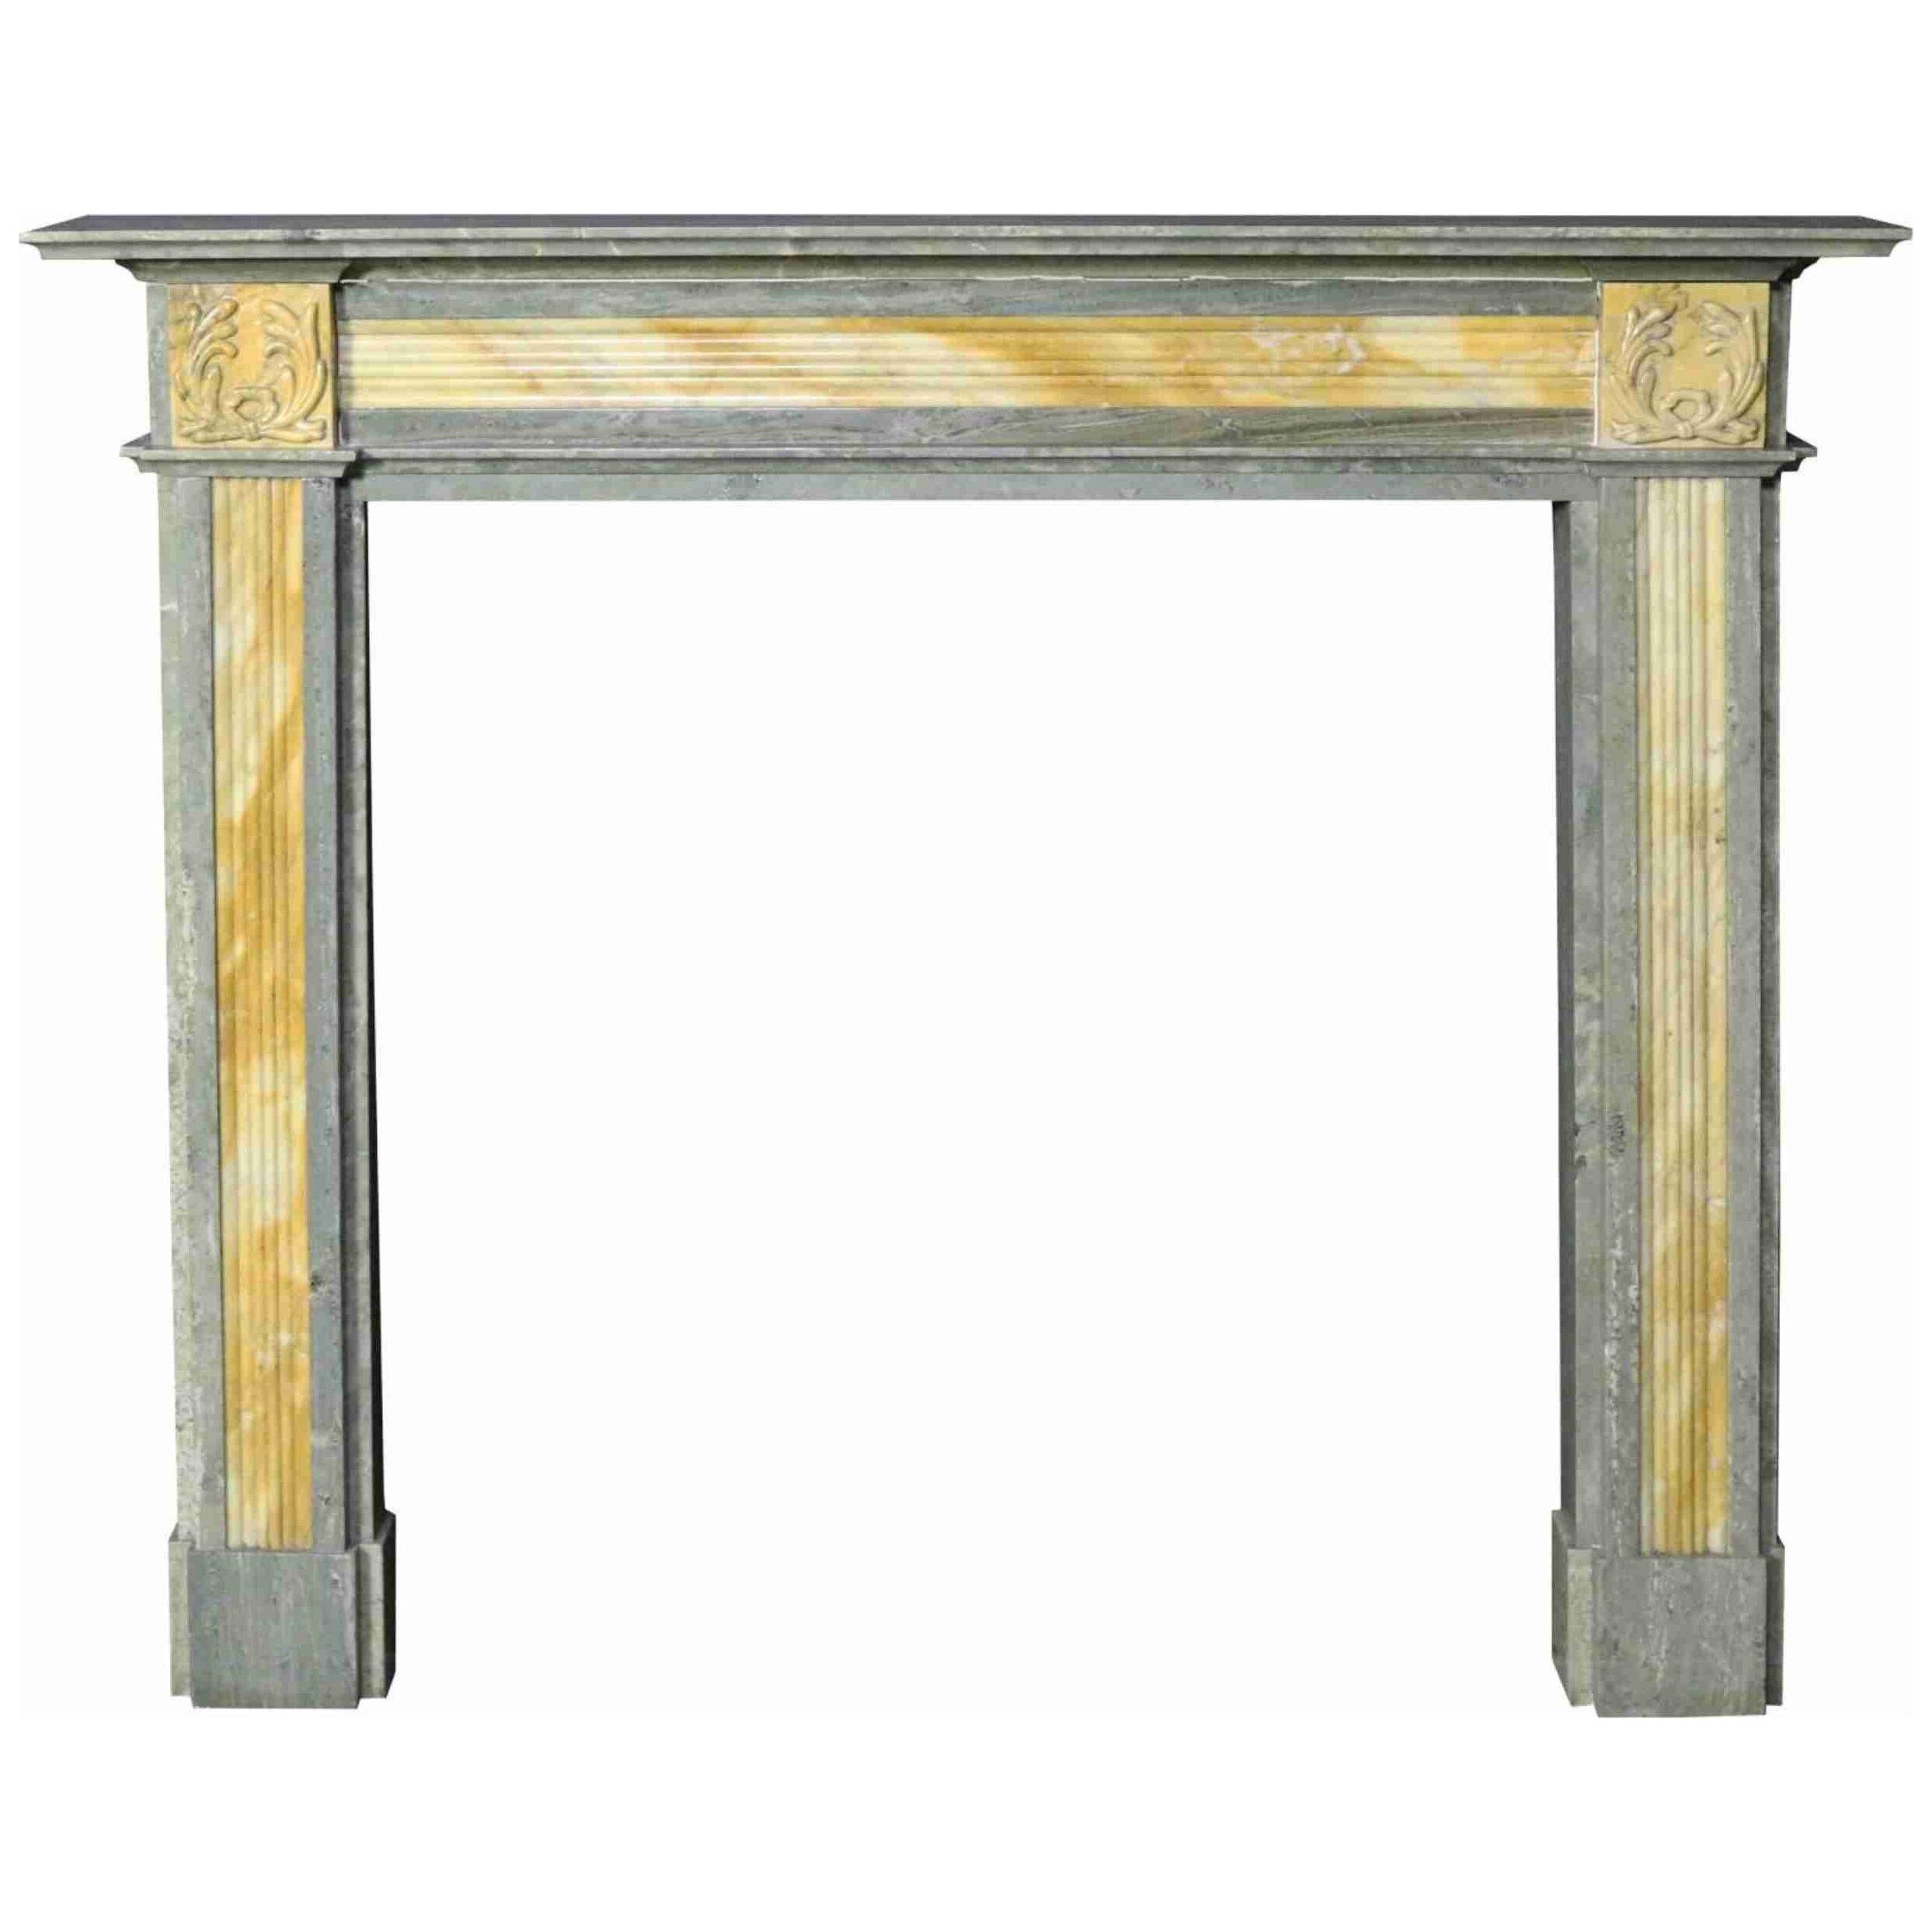 An Antique Swedish Green and Sienna Marble Fire Surround